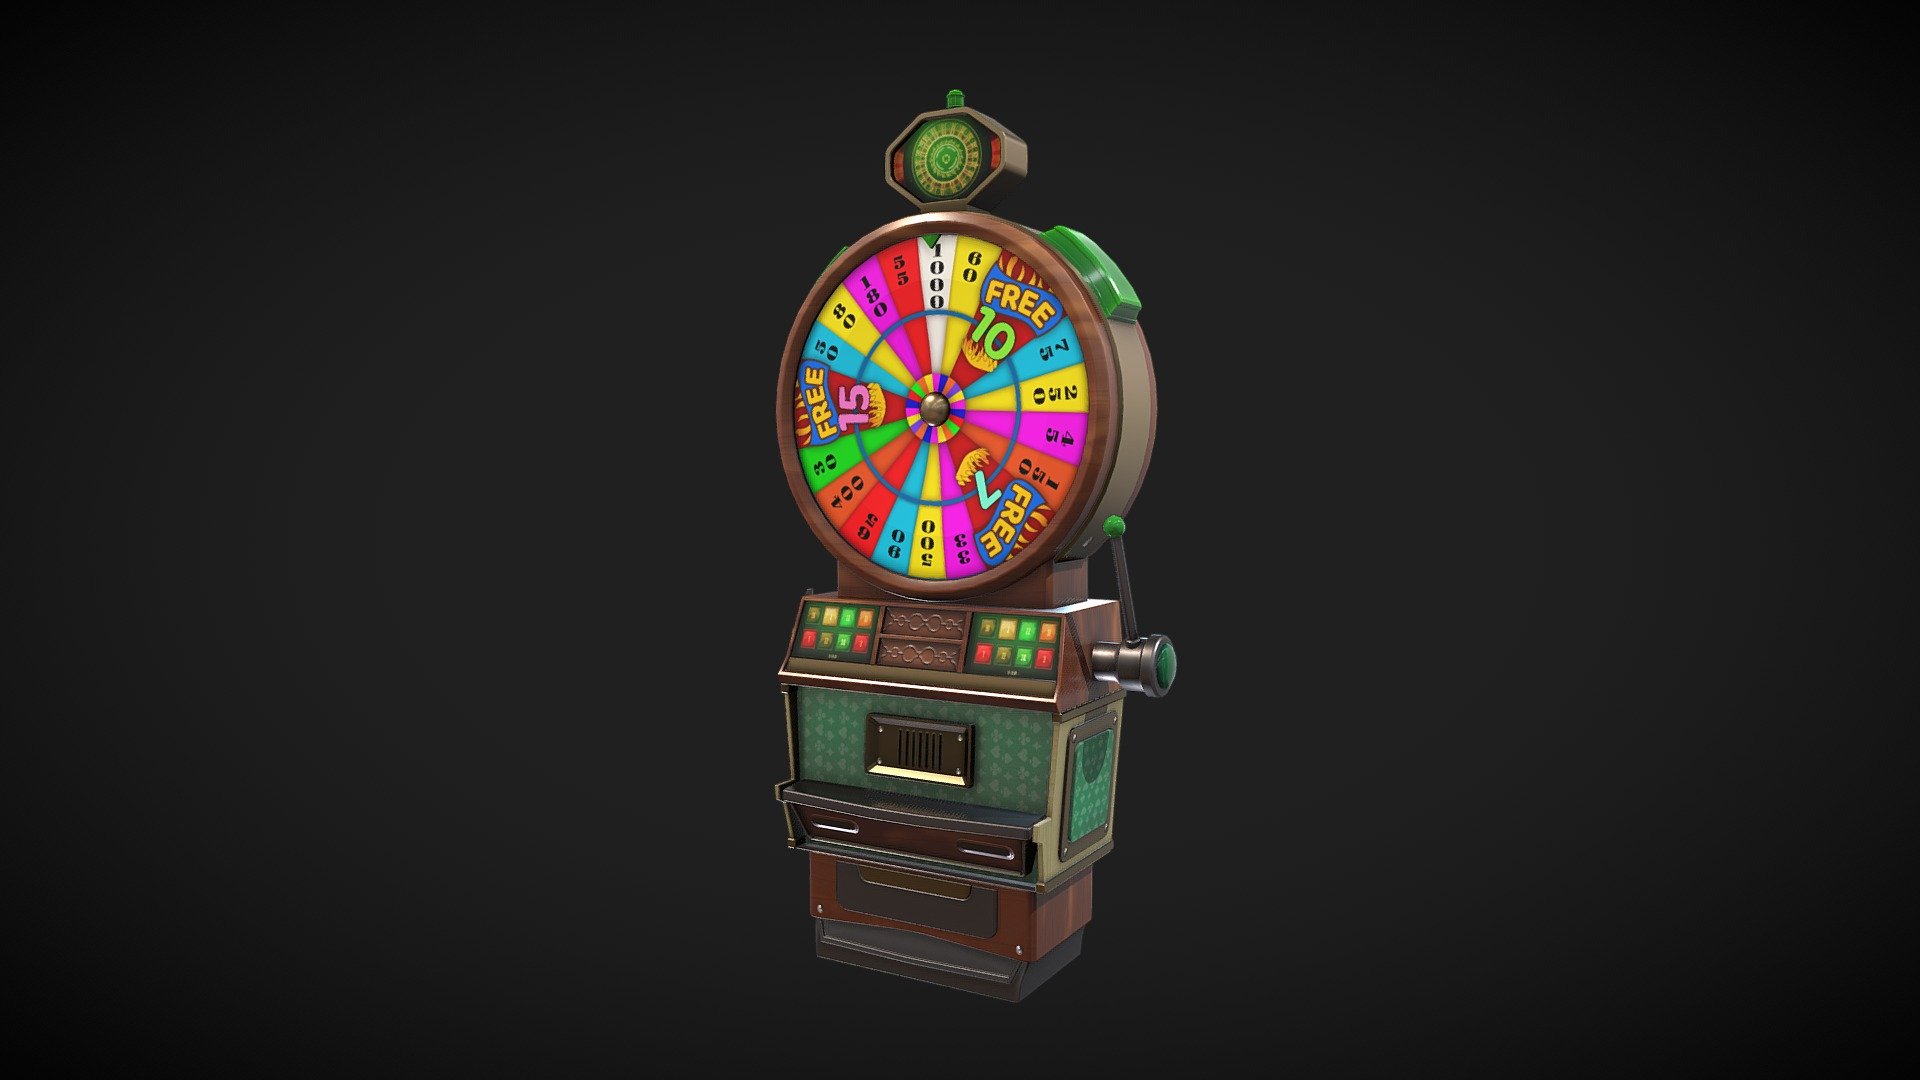 3D Lucky Spin Machine modeling optimized and ready for your personal projects, references and more.

Textures atlas 2048x2048
(VR, AR, Web and Video Game Ready Modeling)

File Format:
-Maya
-Blender
-FBX
-OBJ
-gLTF

Learn more:
Instagram https://www.instagram.com/kraffingdesign/?hl=en-la

2.0 Second update - Lucky Spin Machine - Buy Royalty Free 3D model by kraffing Studio (@kraffing) 3d model